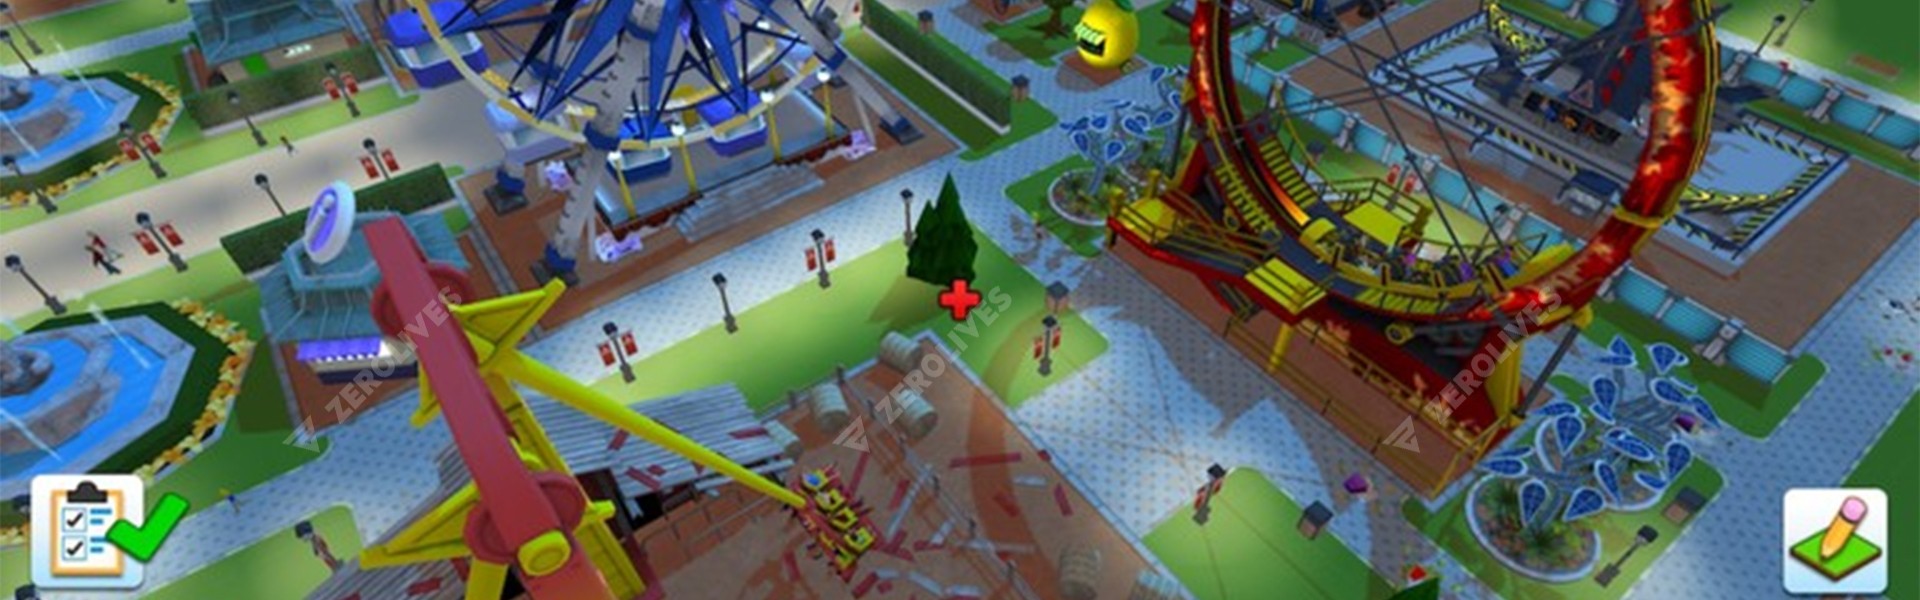 RollerCoaster Tycoon Switch